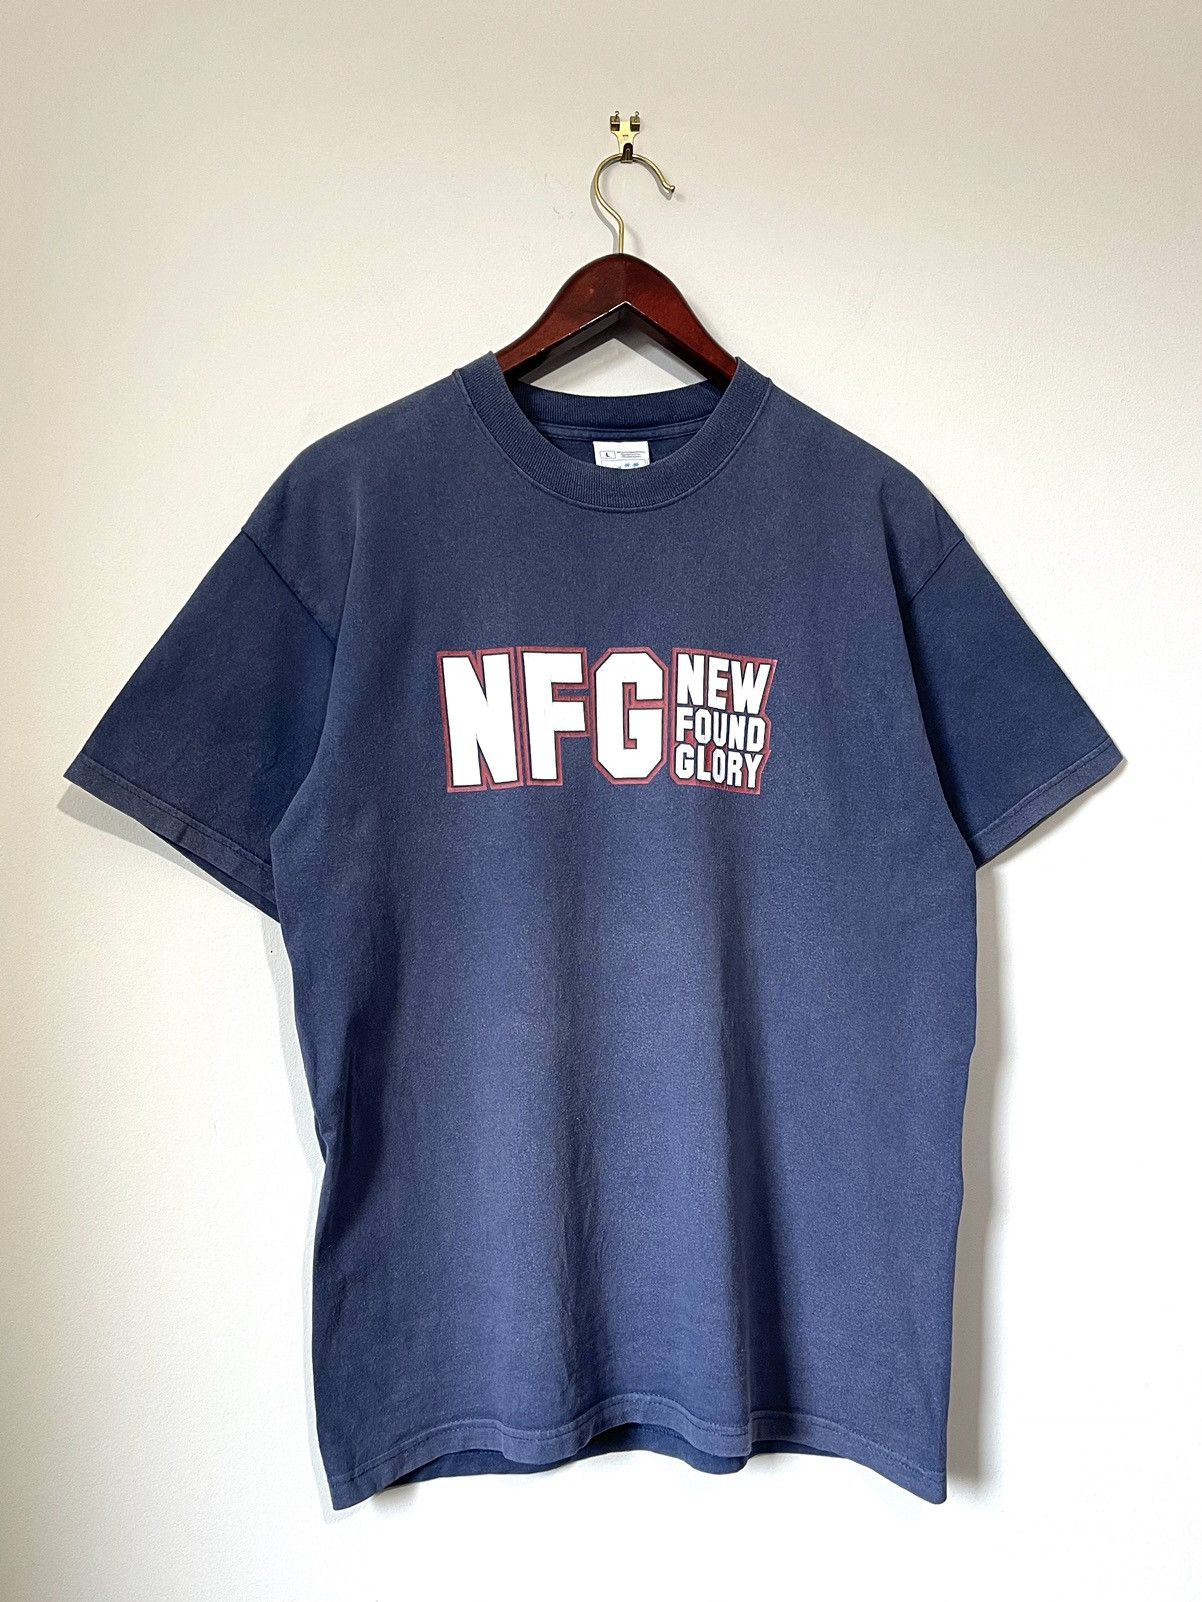 Vintage Vintage New Found Glory Screen Stars T-shirt Size US L / EU 52-54 / 3 - 1 Preview